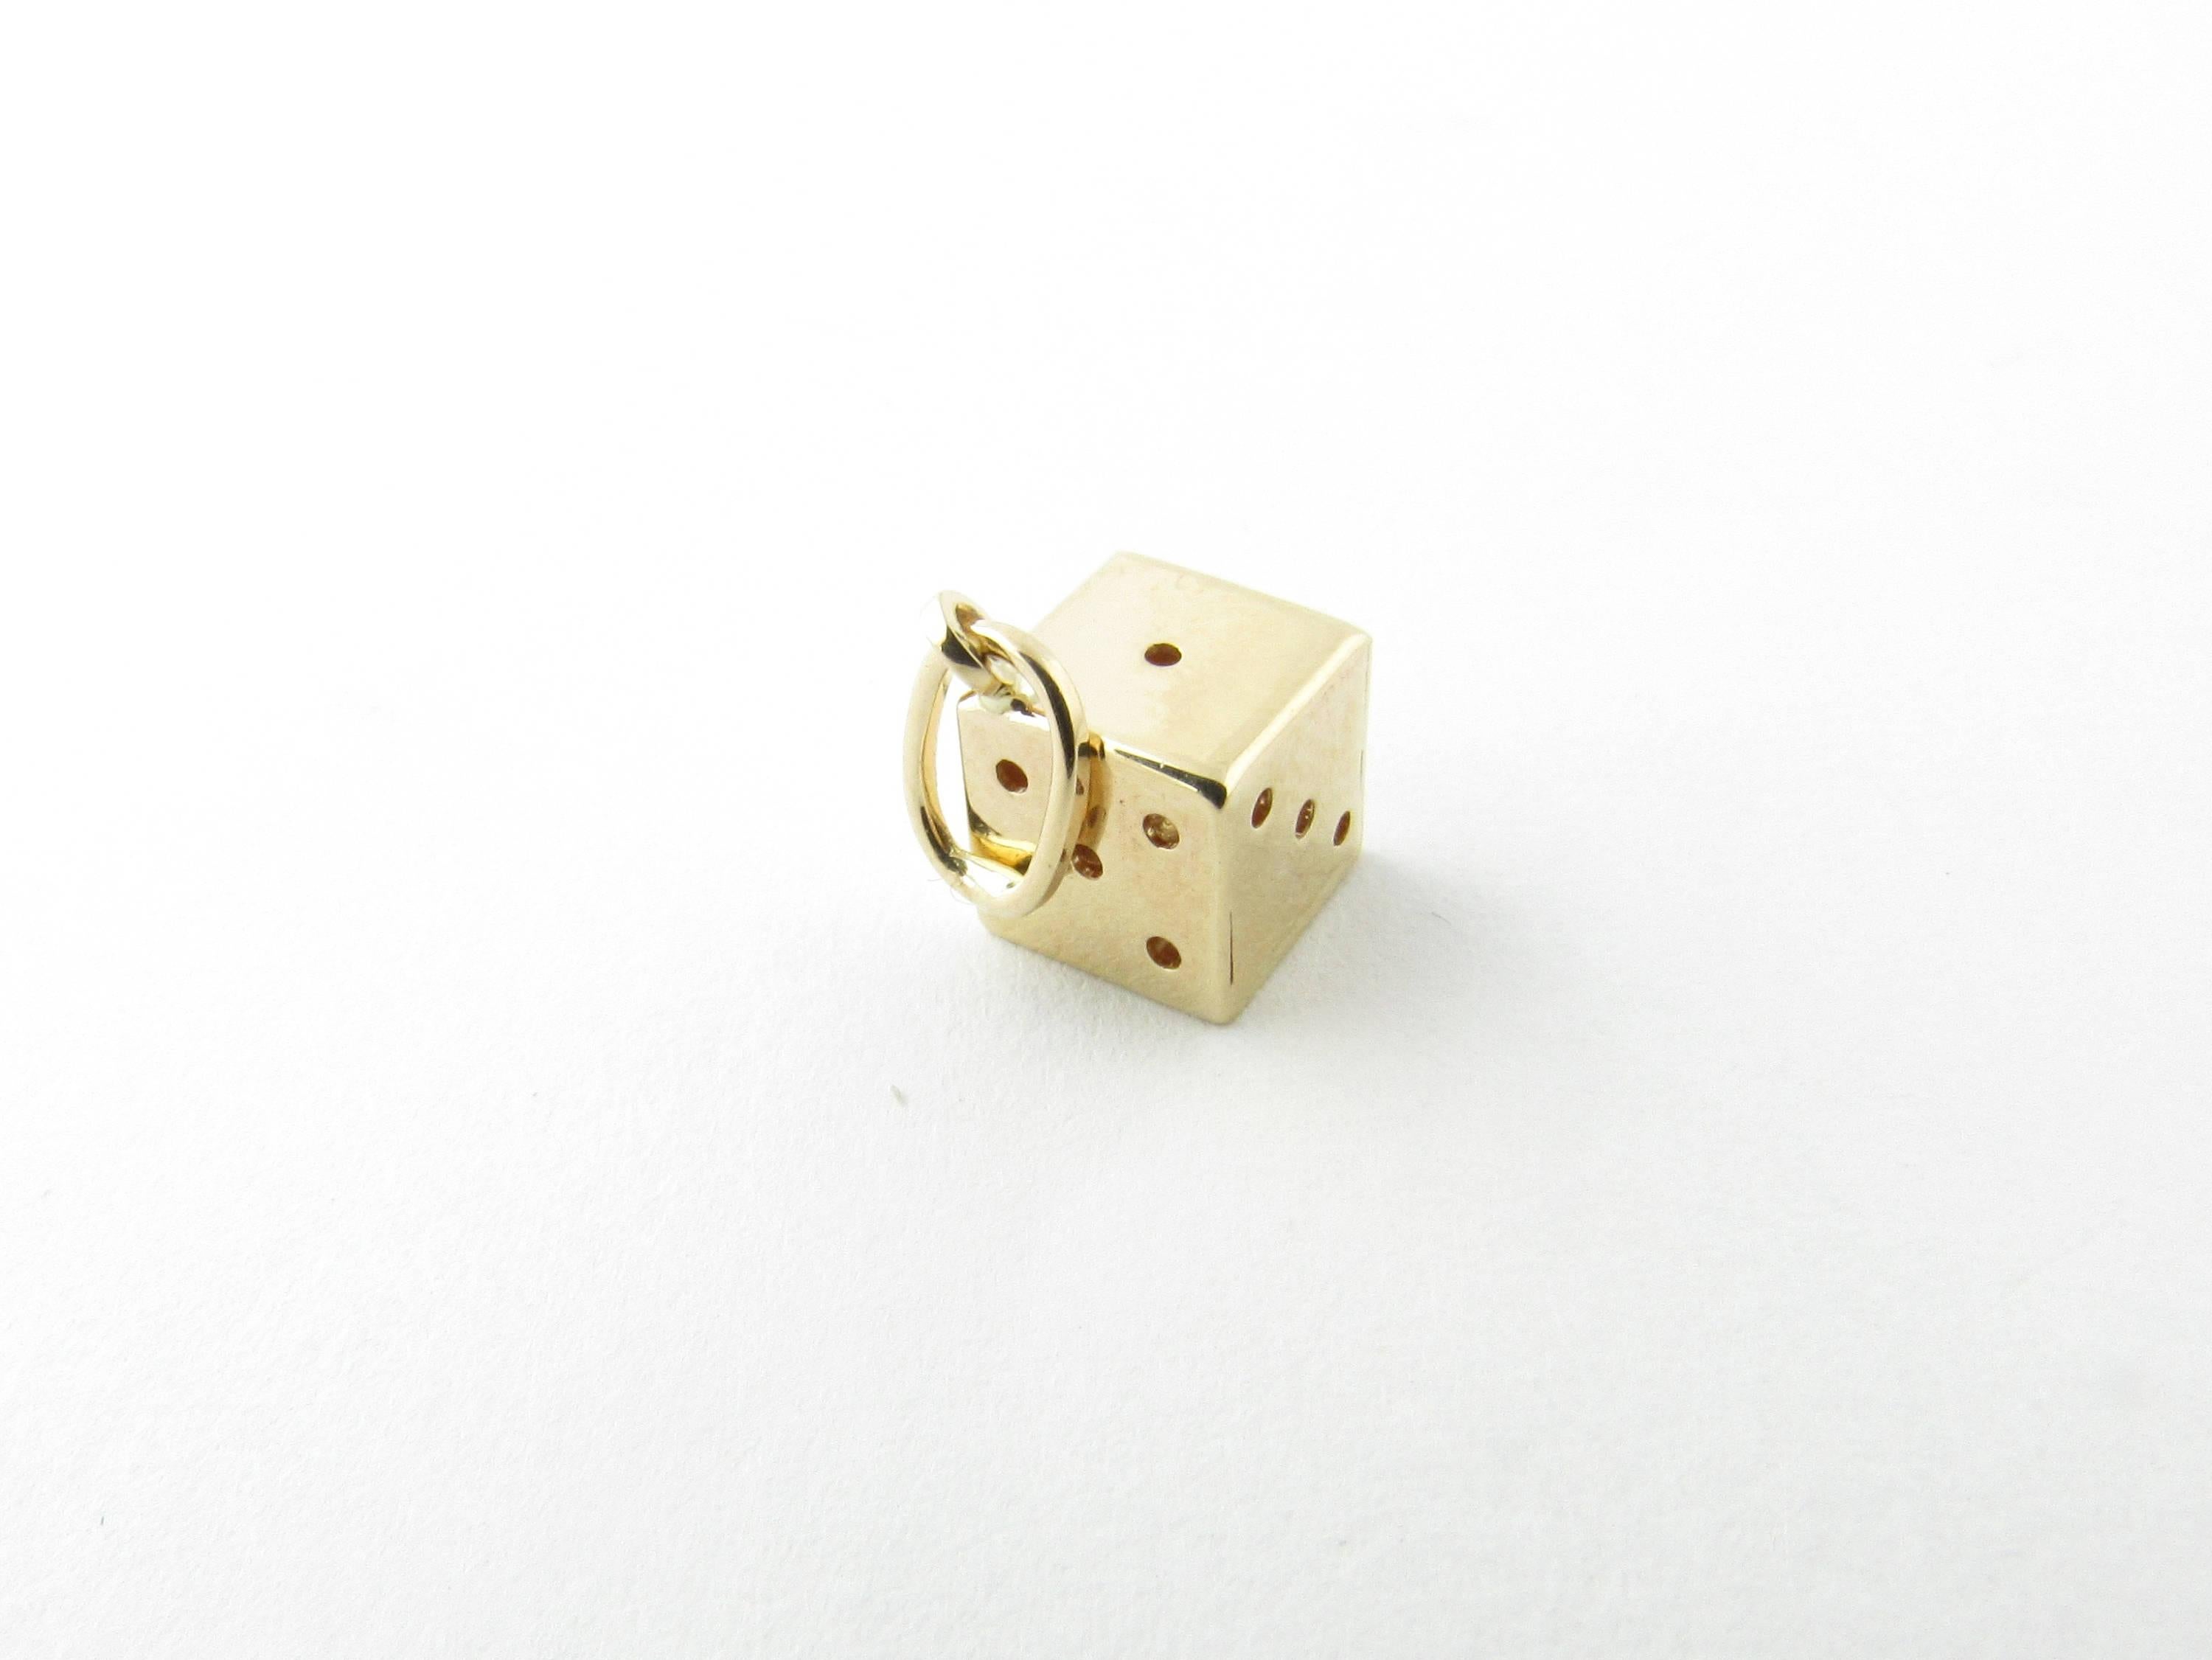 Vintage 14 Karat Yellow Gold Dice Charm

Roll the dice!

This 3D charm features a single die beautifully detailed in 14K yellow gold.

Size: 6 mm x 6 mm (actual charm)

Weight: 0.4 dwt. / 0.7 gr.

Hallmark: 14K

Very good condition, professionally